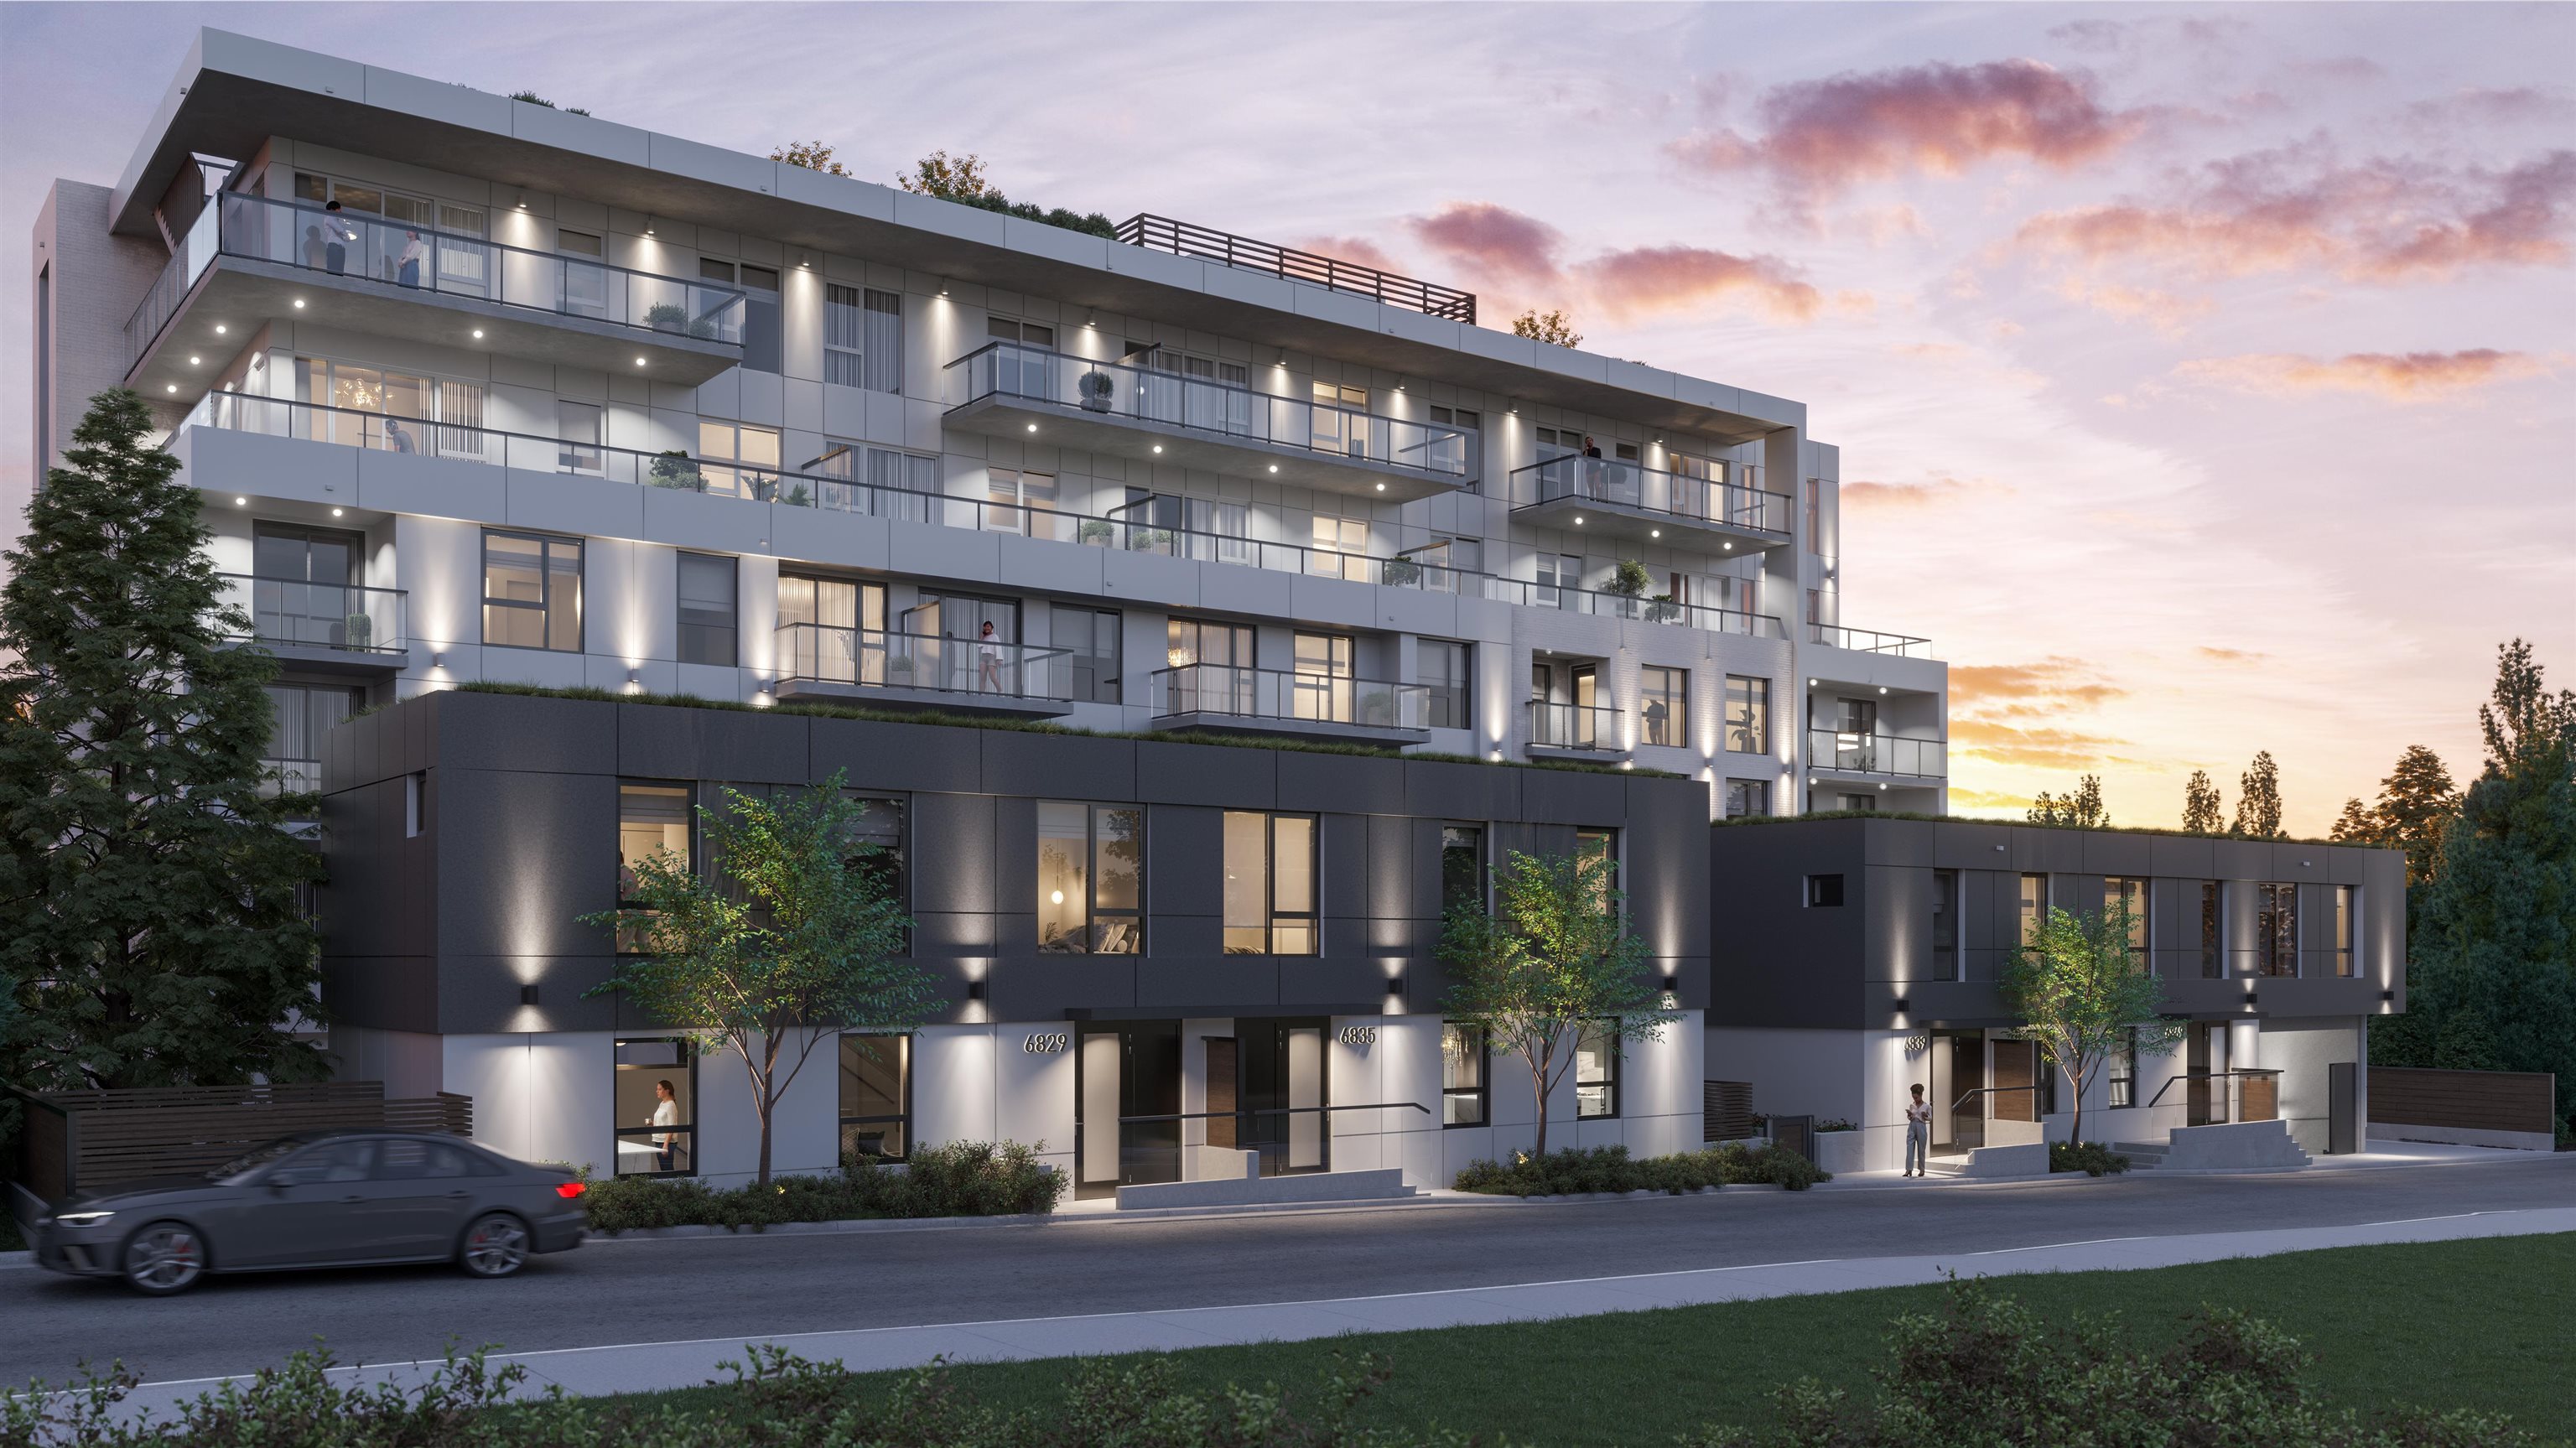 Listing image of 212 6859 CAMBIE STREET